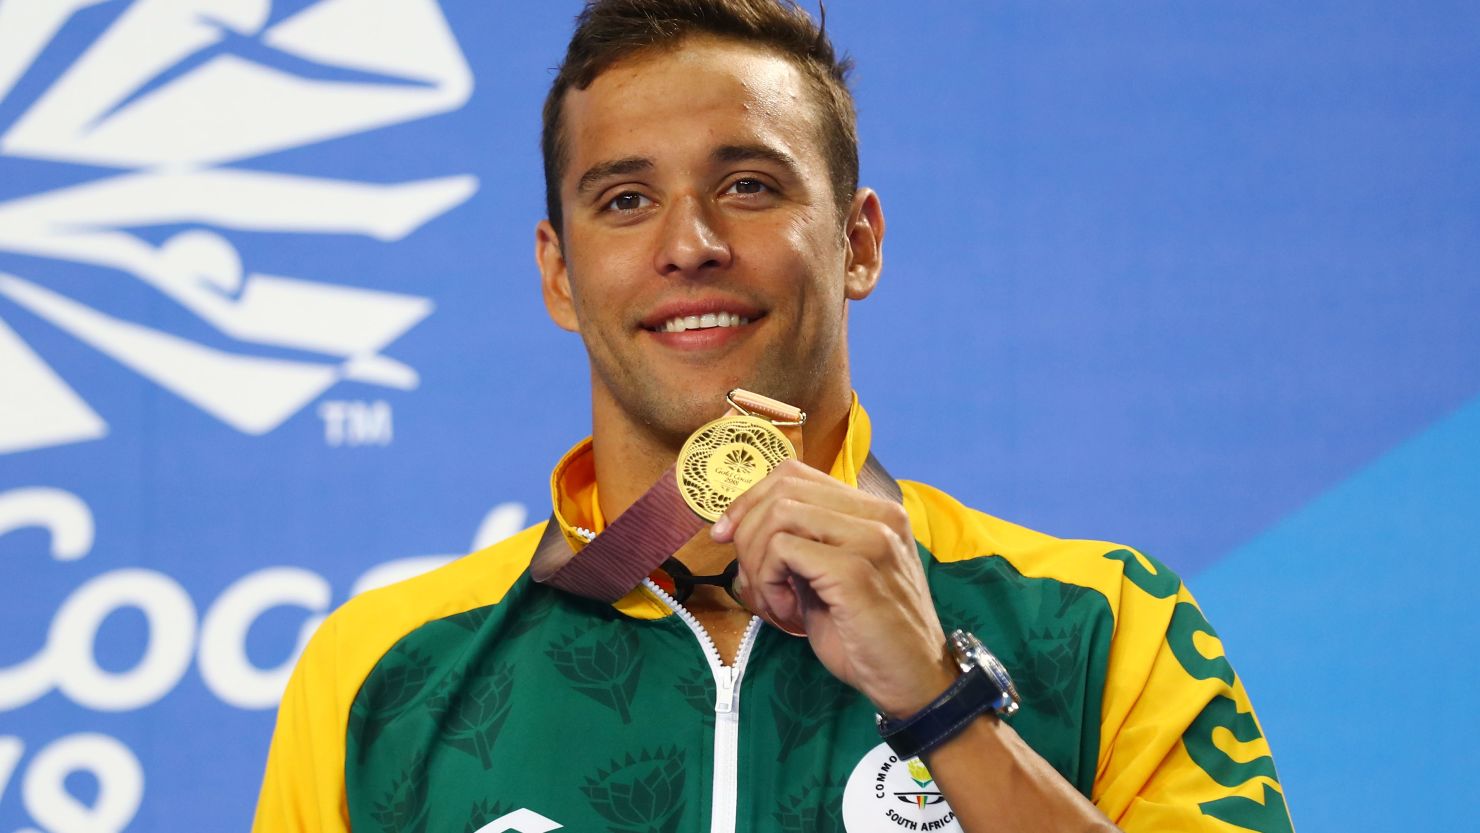 Gold medalist Chad le Clos of South Africa poses during the medal ceremony for the men's 200m butterfly final.